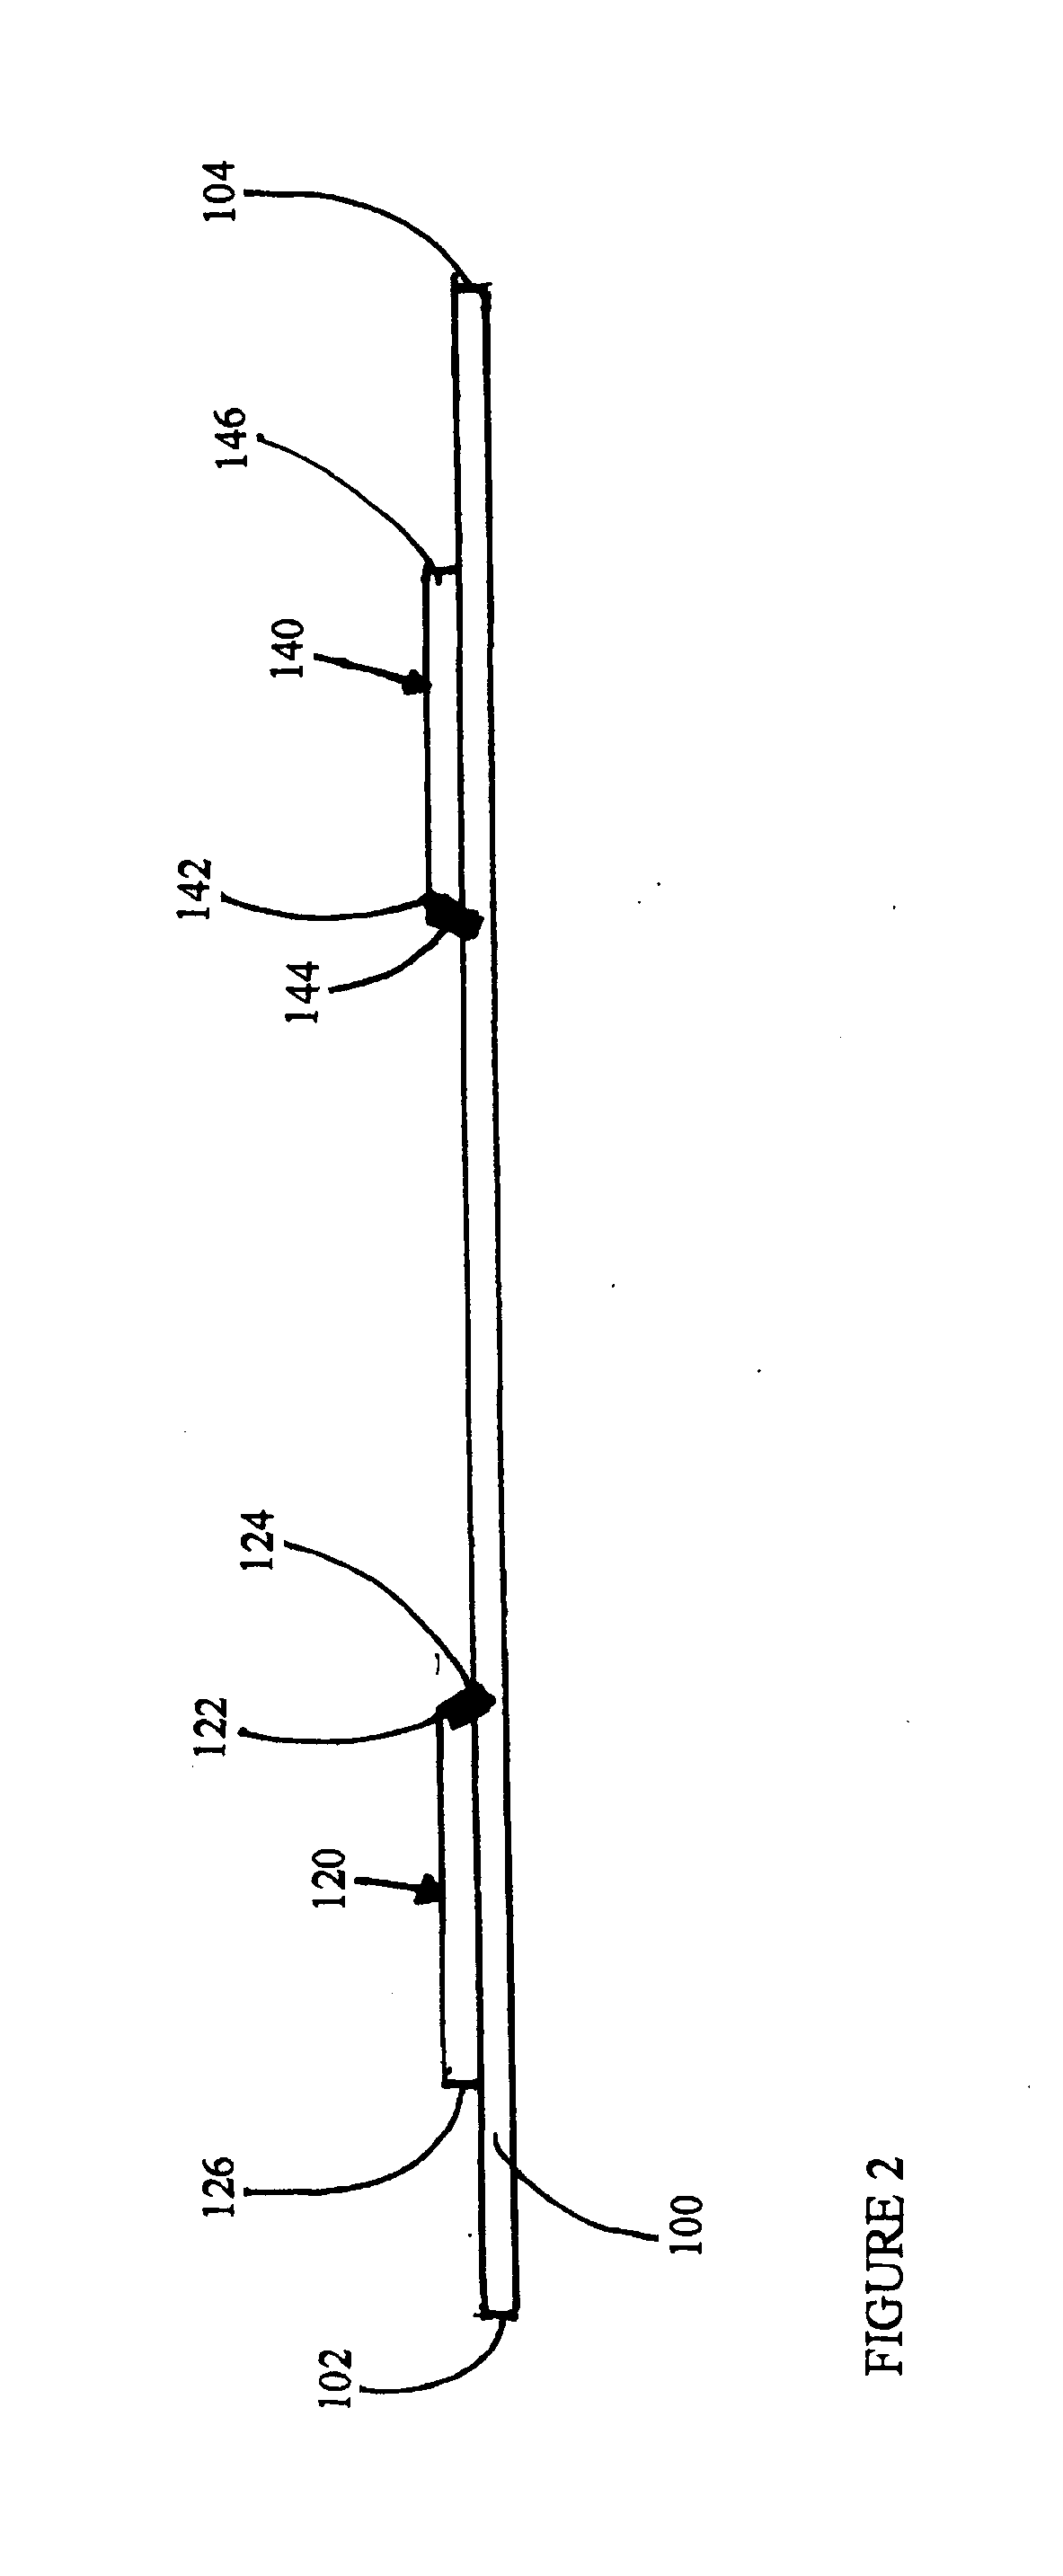 Process for Forming Reinforced Rocker Panel Assembly